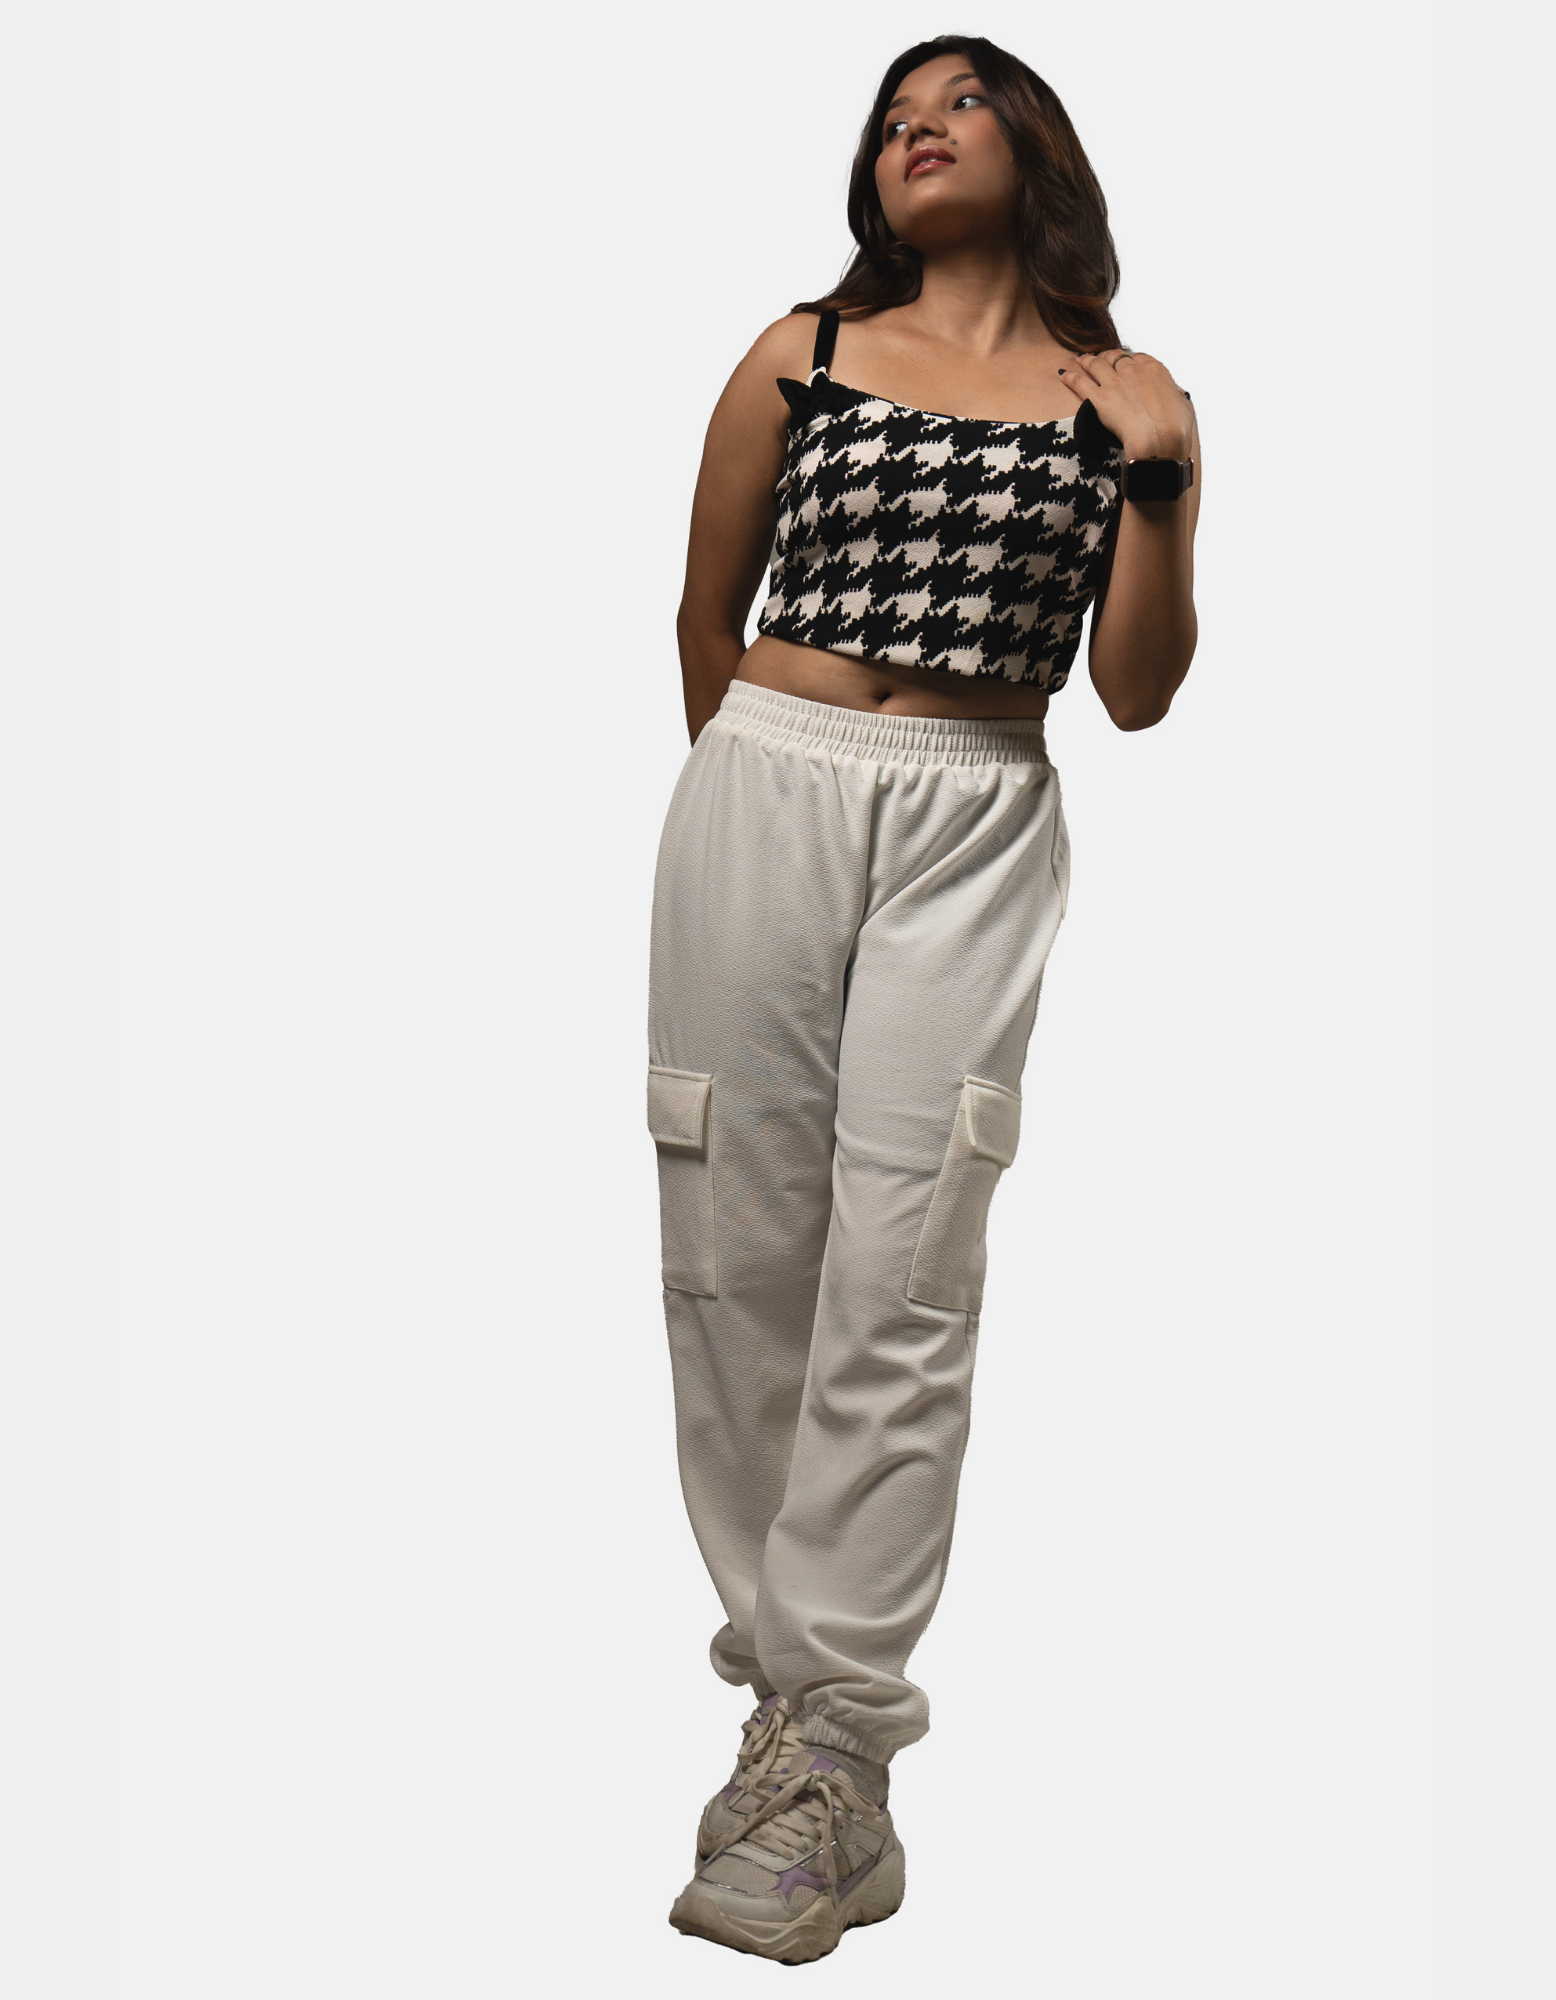 Bae N Bruh - Bow Wow Bounce 'n' Jog Co-Ord Set back front view